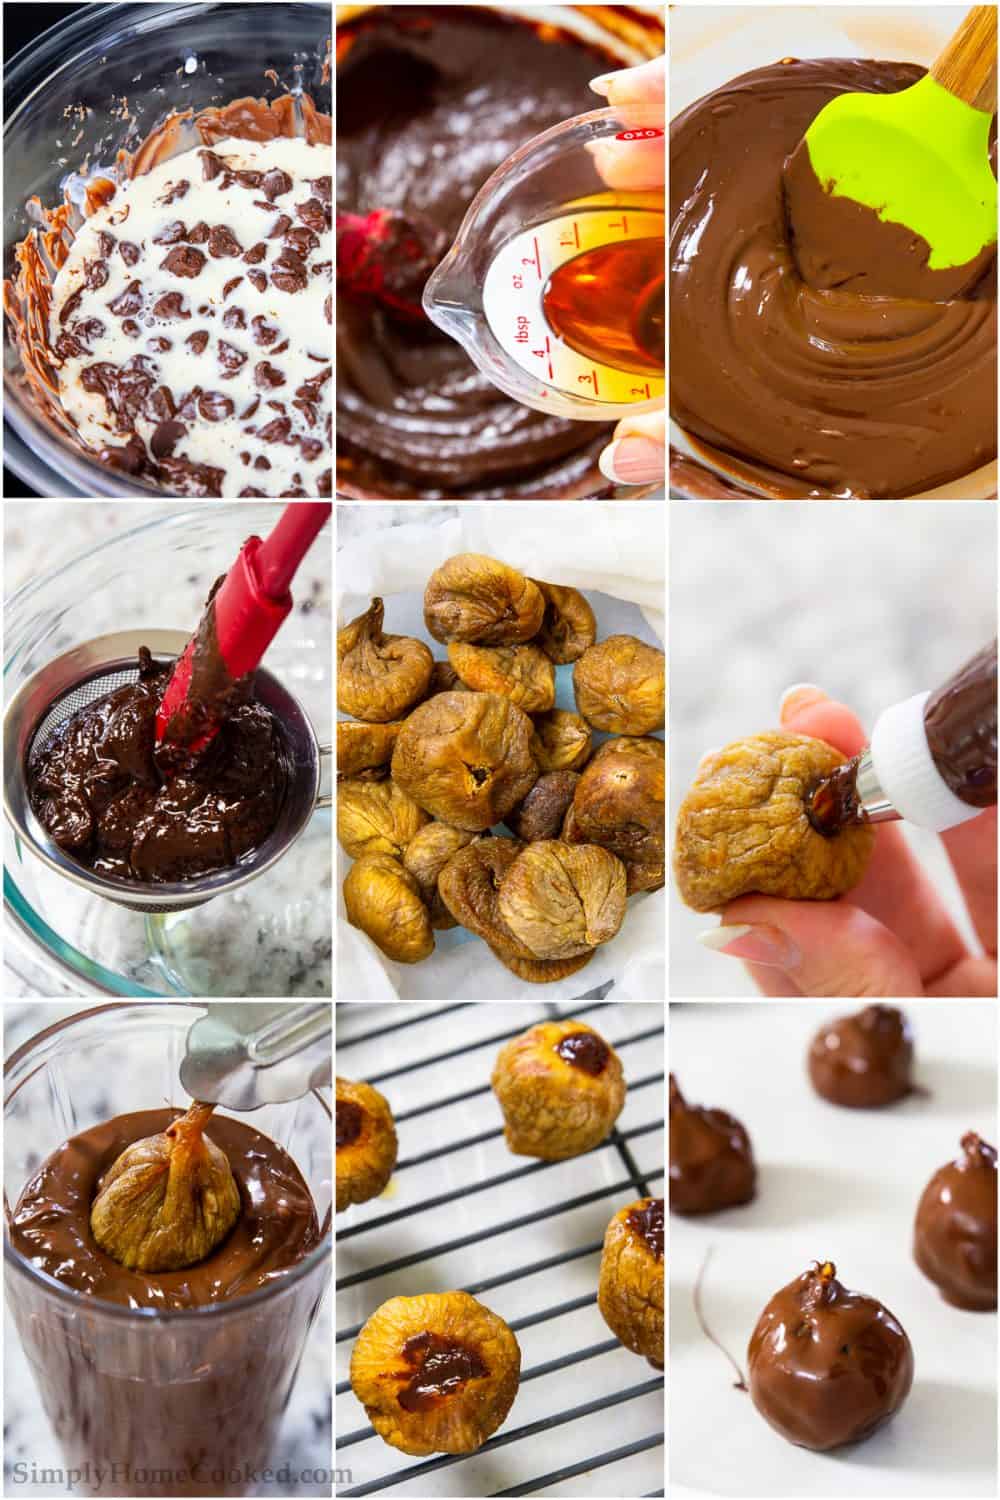 How to make fig bonbons step by step pictures